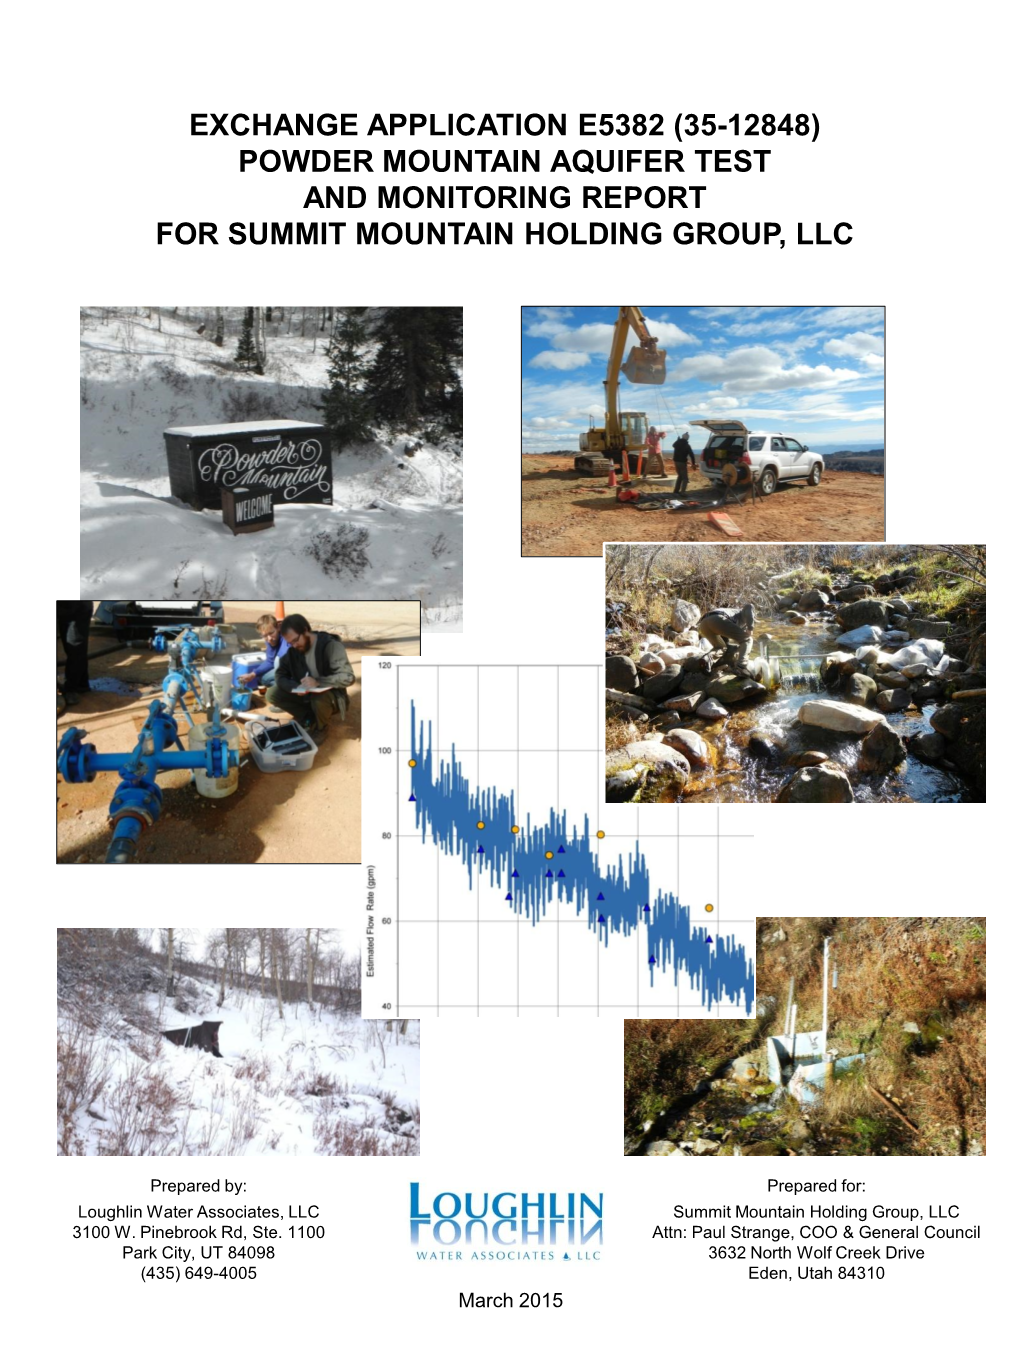 Powder Mountain Aquifer Test and Monitoring Report for Summit Mountain Holding Group, Llc